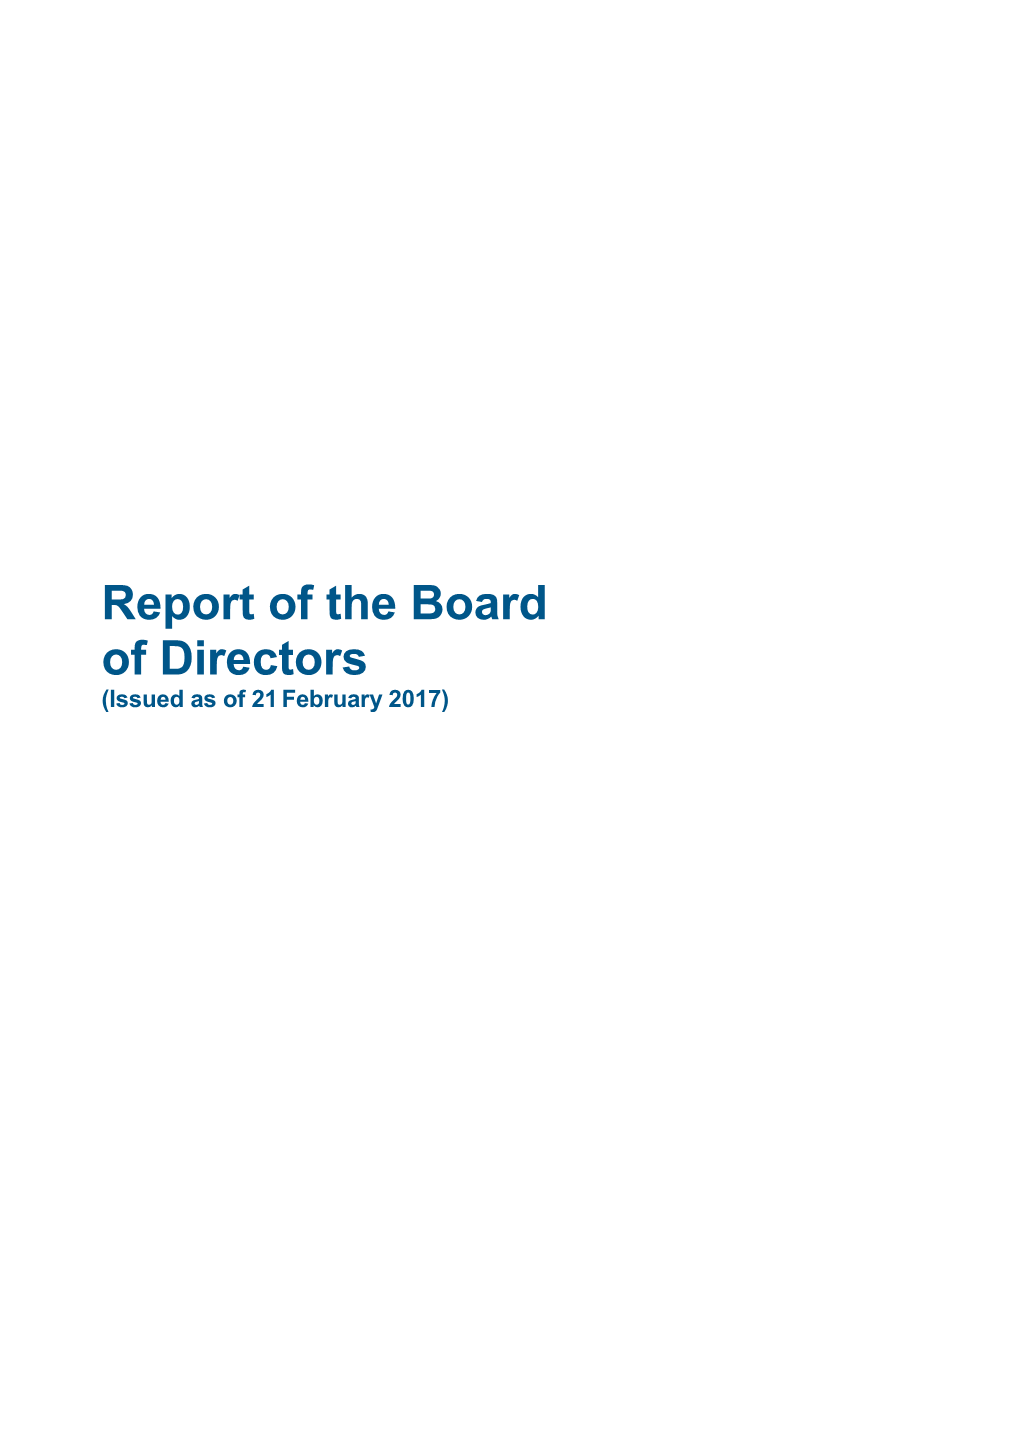 Airbus Group SE Report of the Board of Directors 2016 2.58 MB